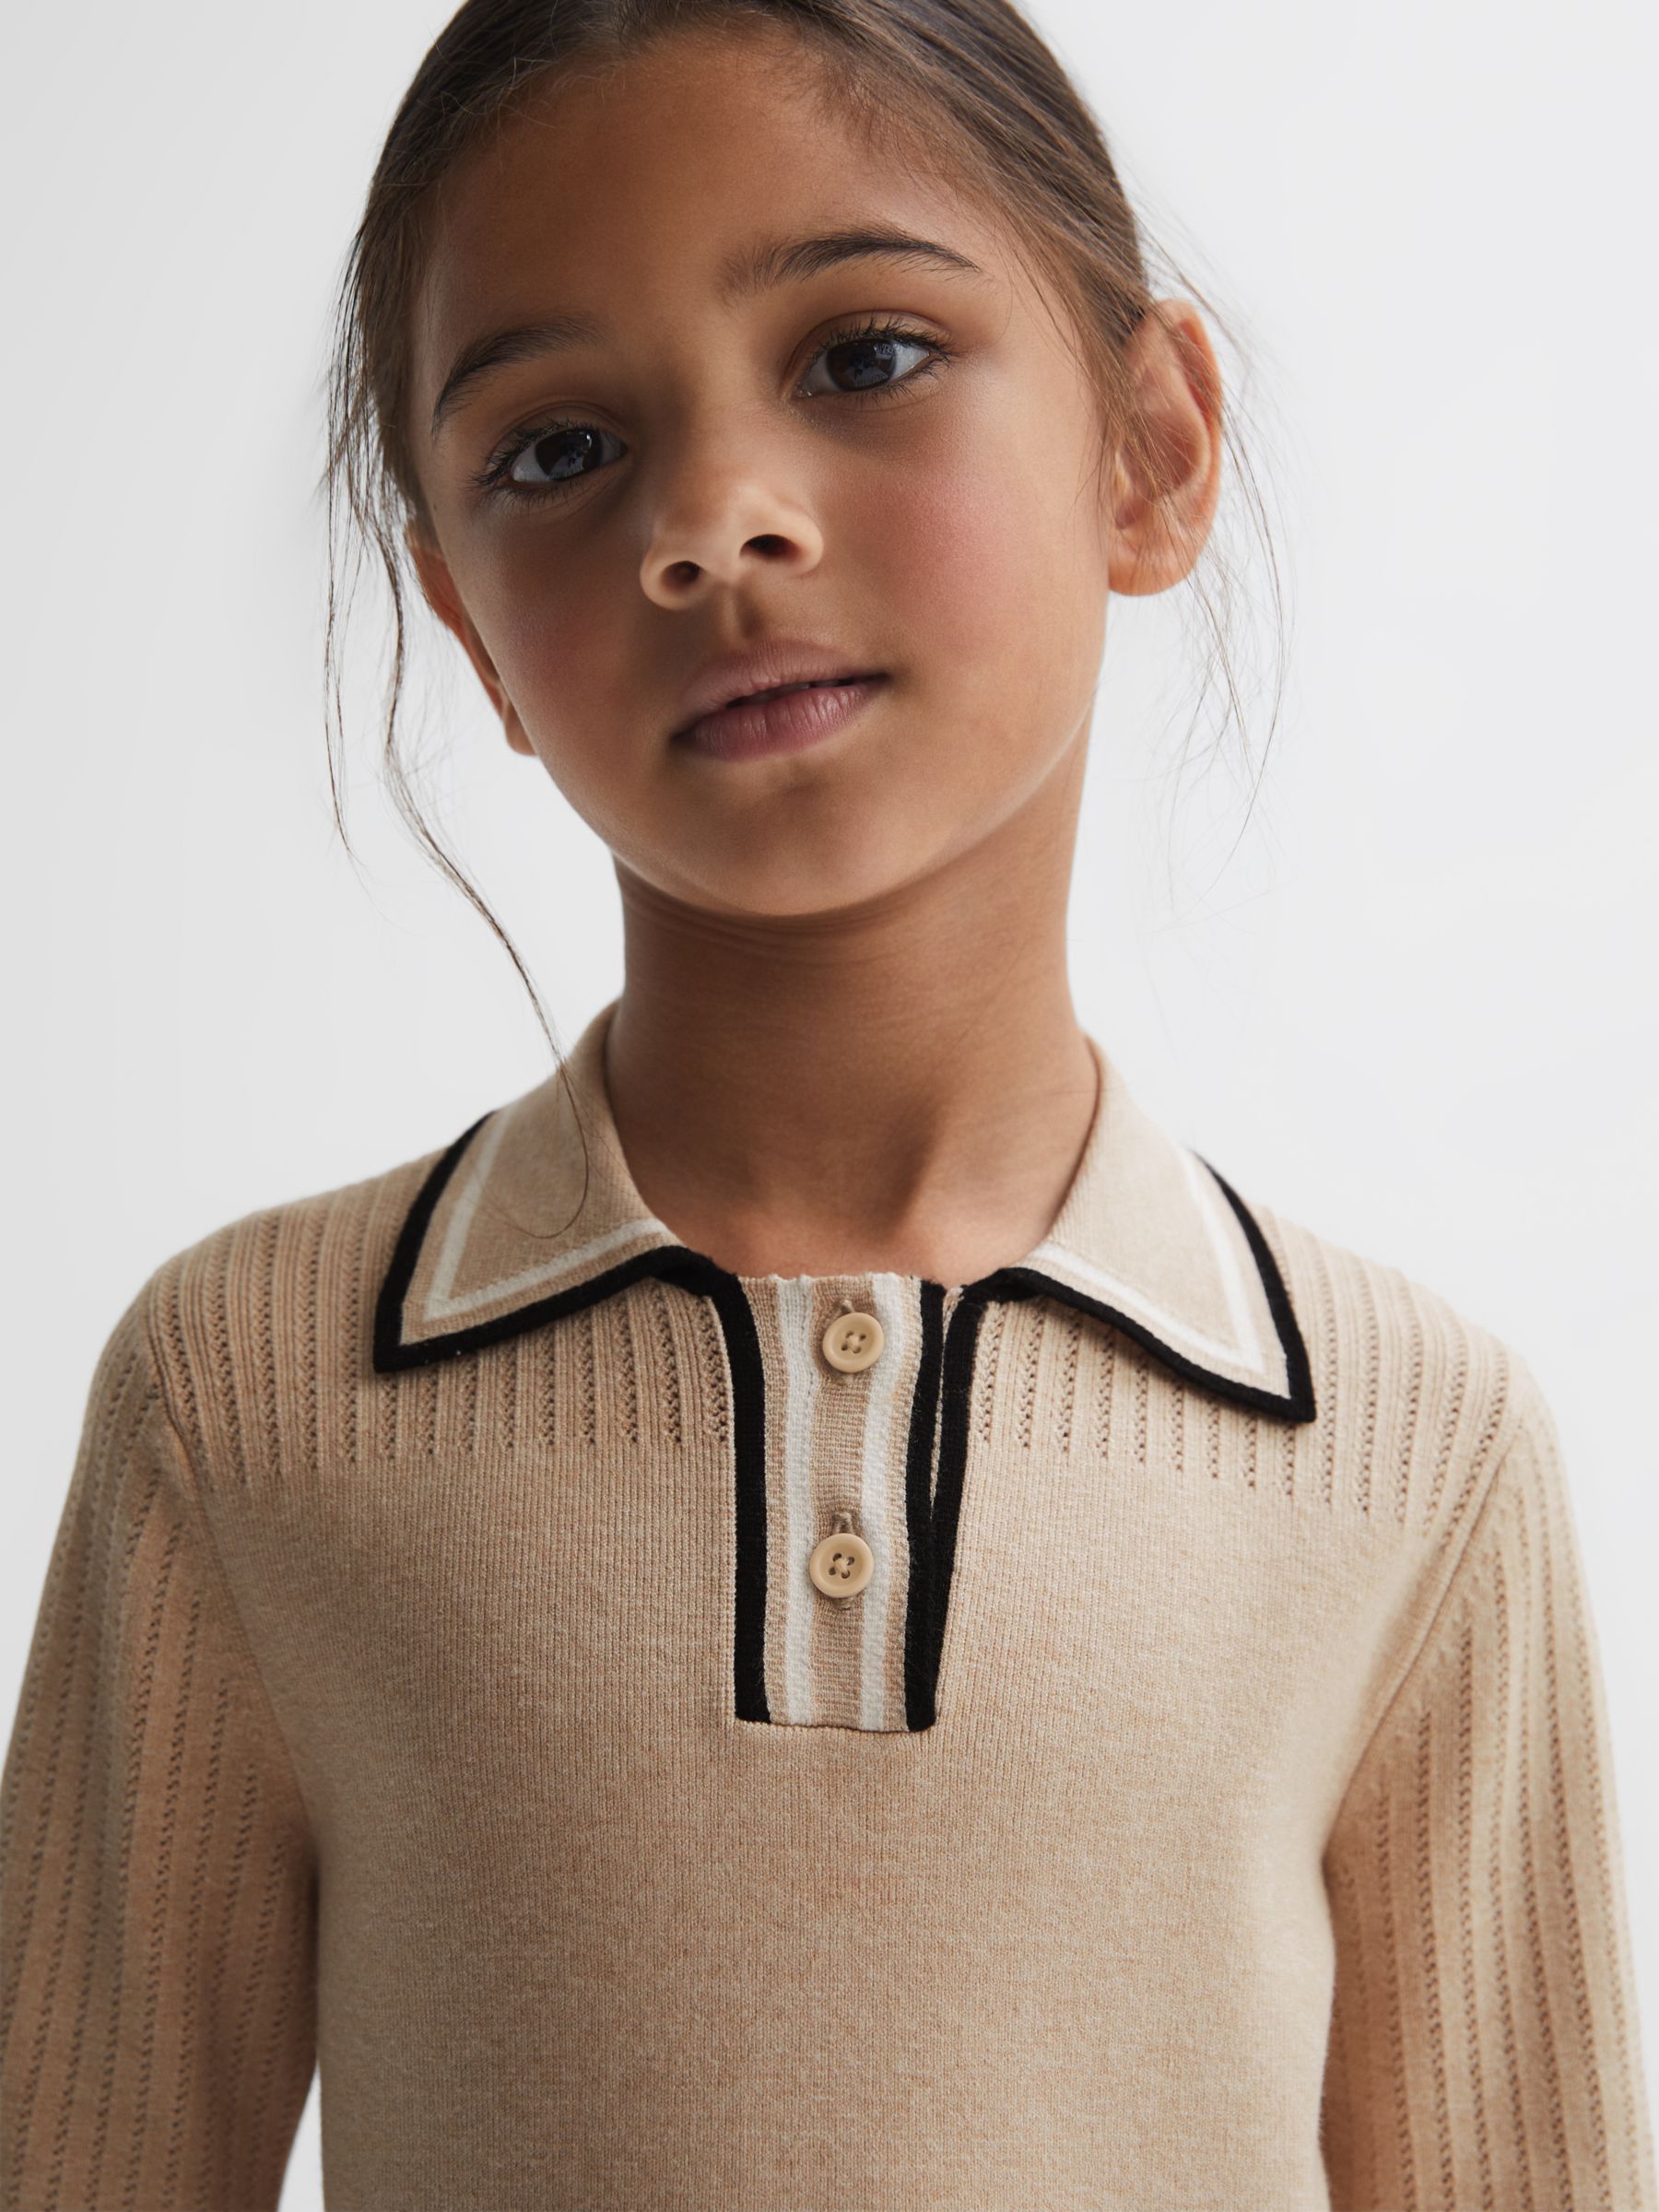 Buy Reiss Kids' Ruby Knitted Polo Dress Online at johnlewis.com